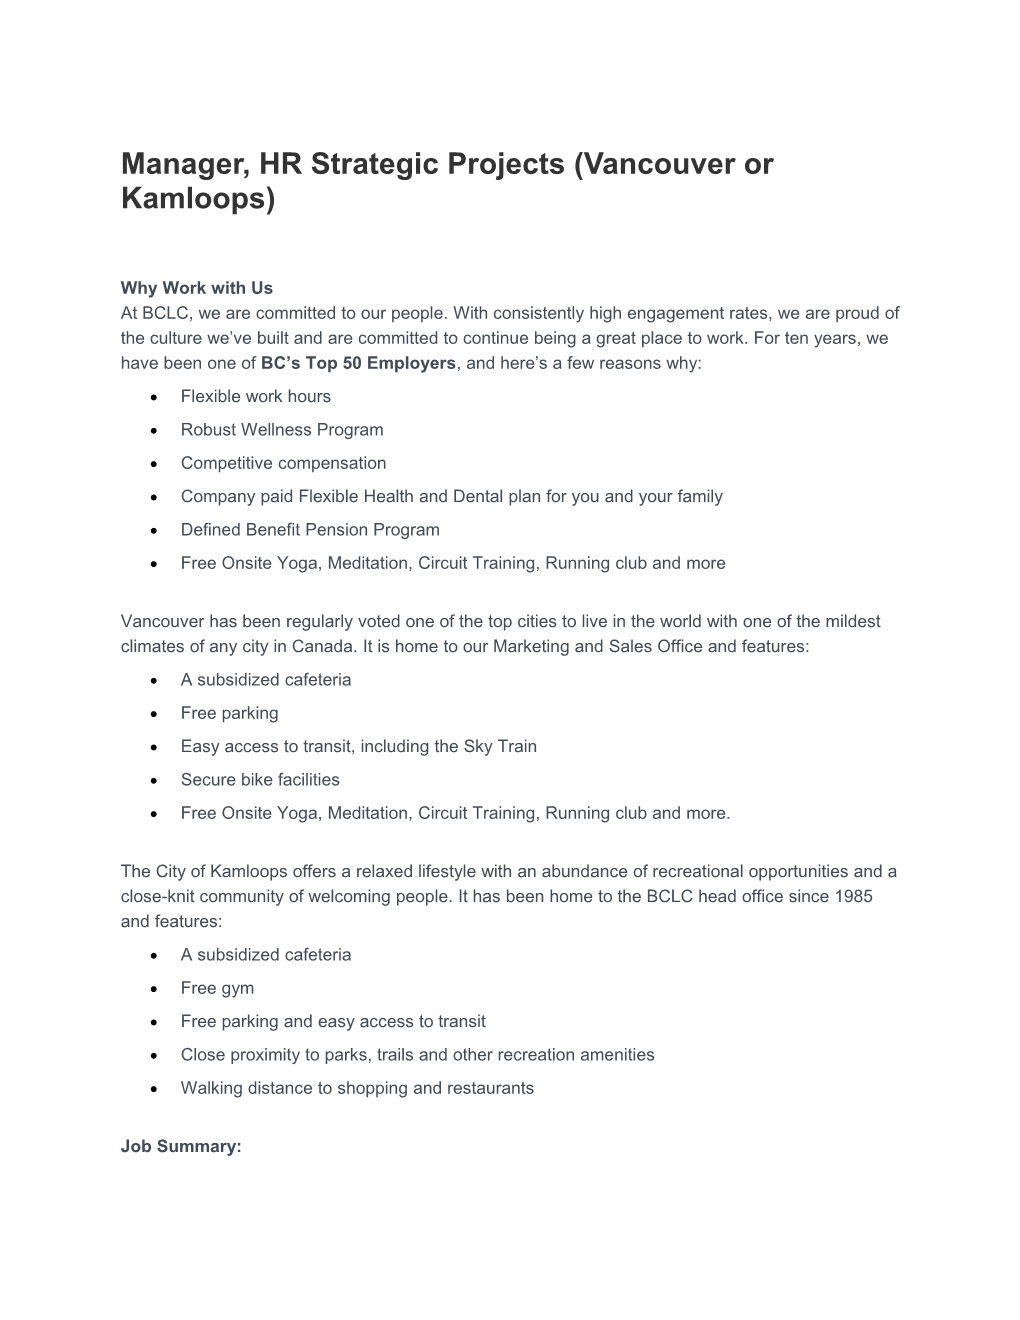 Manager, HR Strategic Projects (Vancouver Or Kamloops)